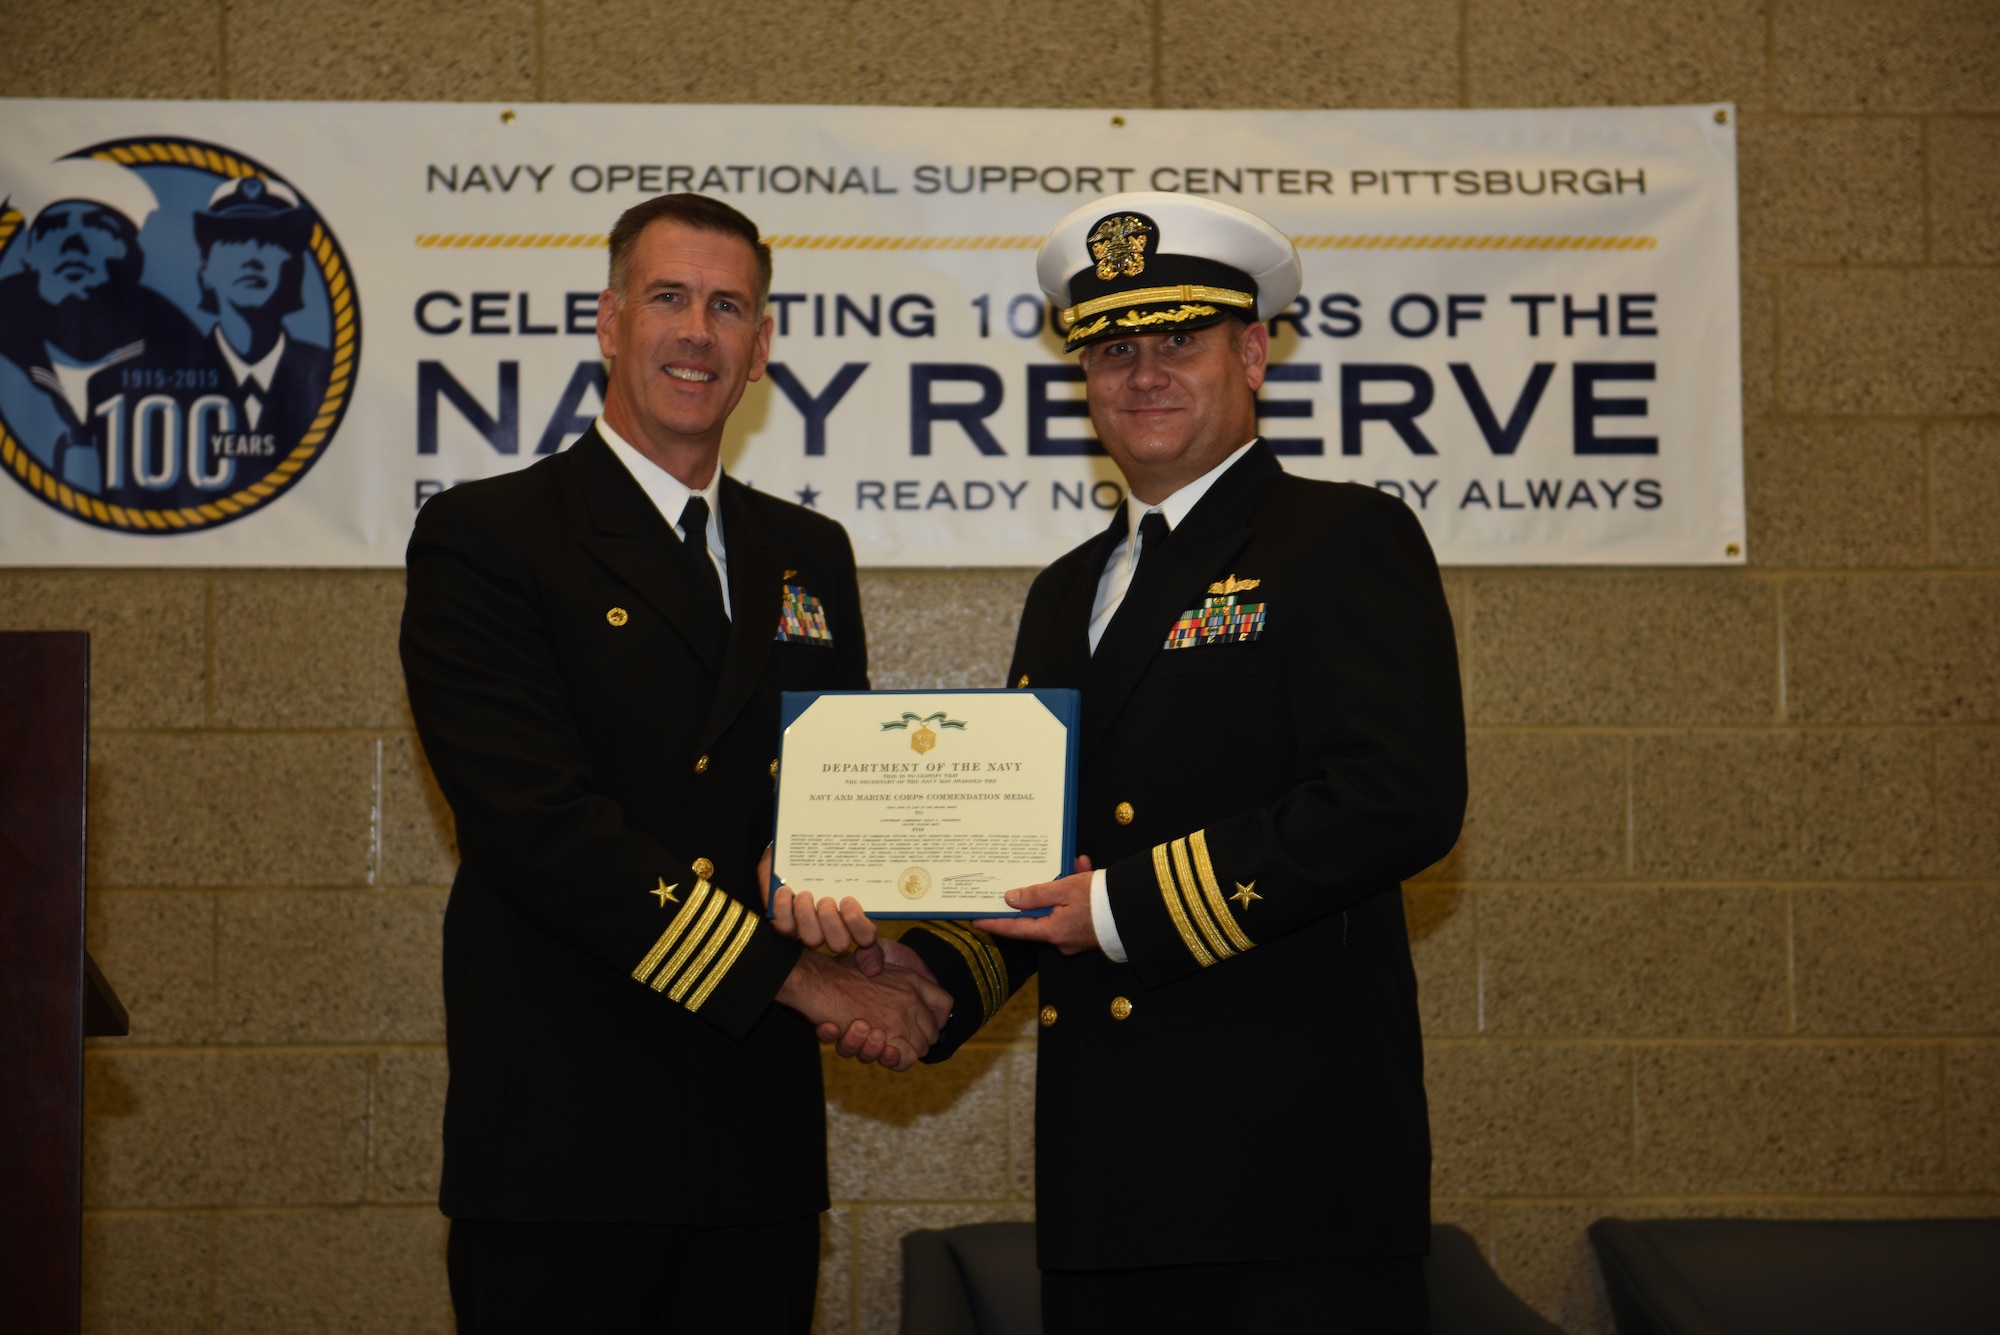 Navy Capt. Scott Laedlein awards Cmdr. Craig Frangente with the Navy and Marine Corps Commendation Medal during a change of command ceremony at the Pittsburgh International Airport Air Reserve Station, Oct. 3, 2015. Frangente relinquished command to Cmdr. Donald G. Haley. (U.S. Air Force photo by Senior Airman Marjorie A. Bowlden)